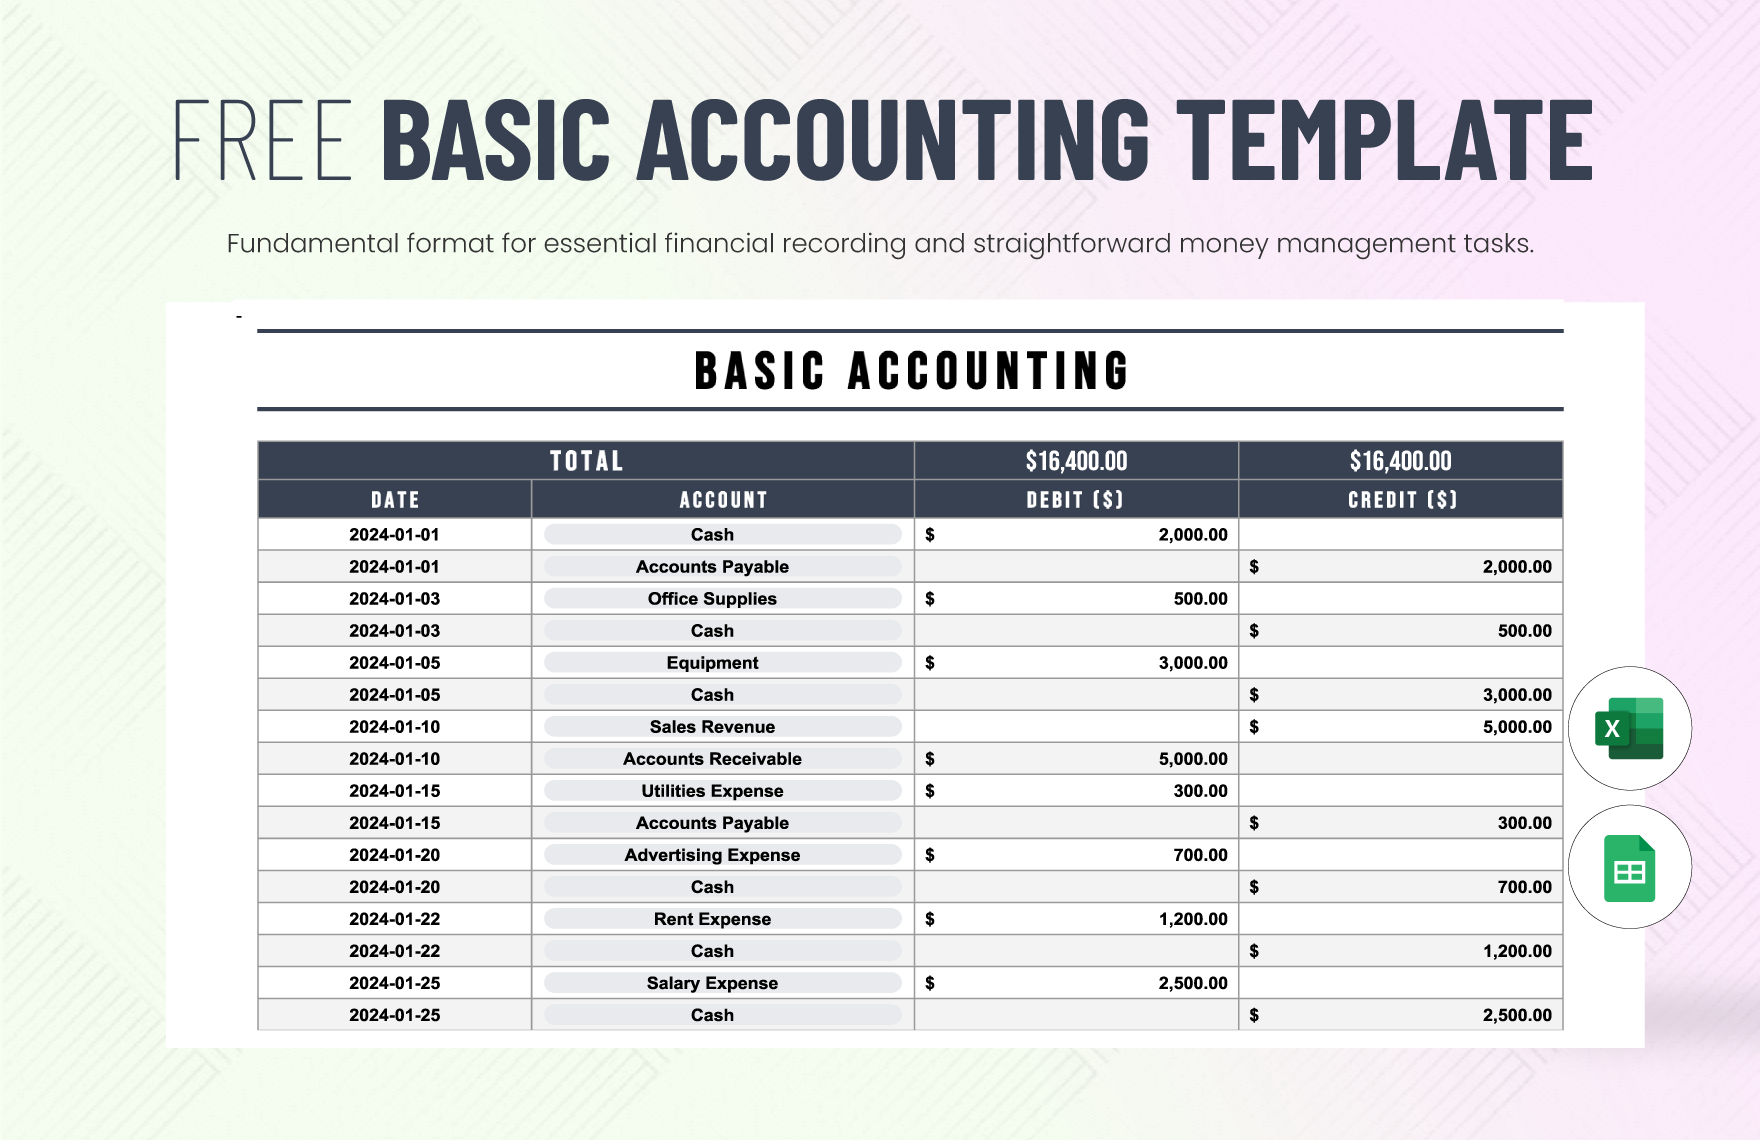 Basic Accounting Template